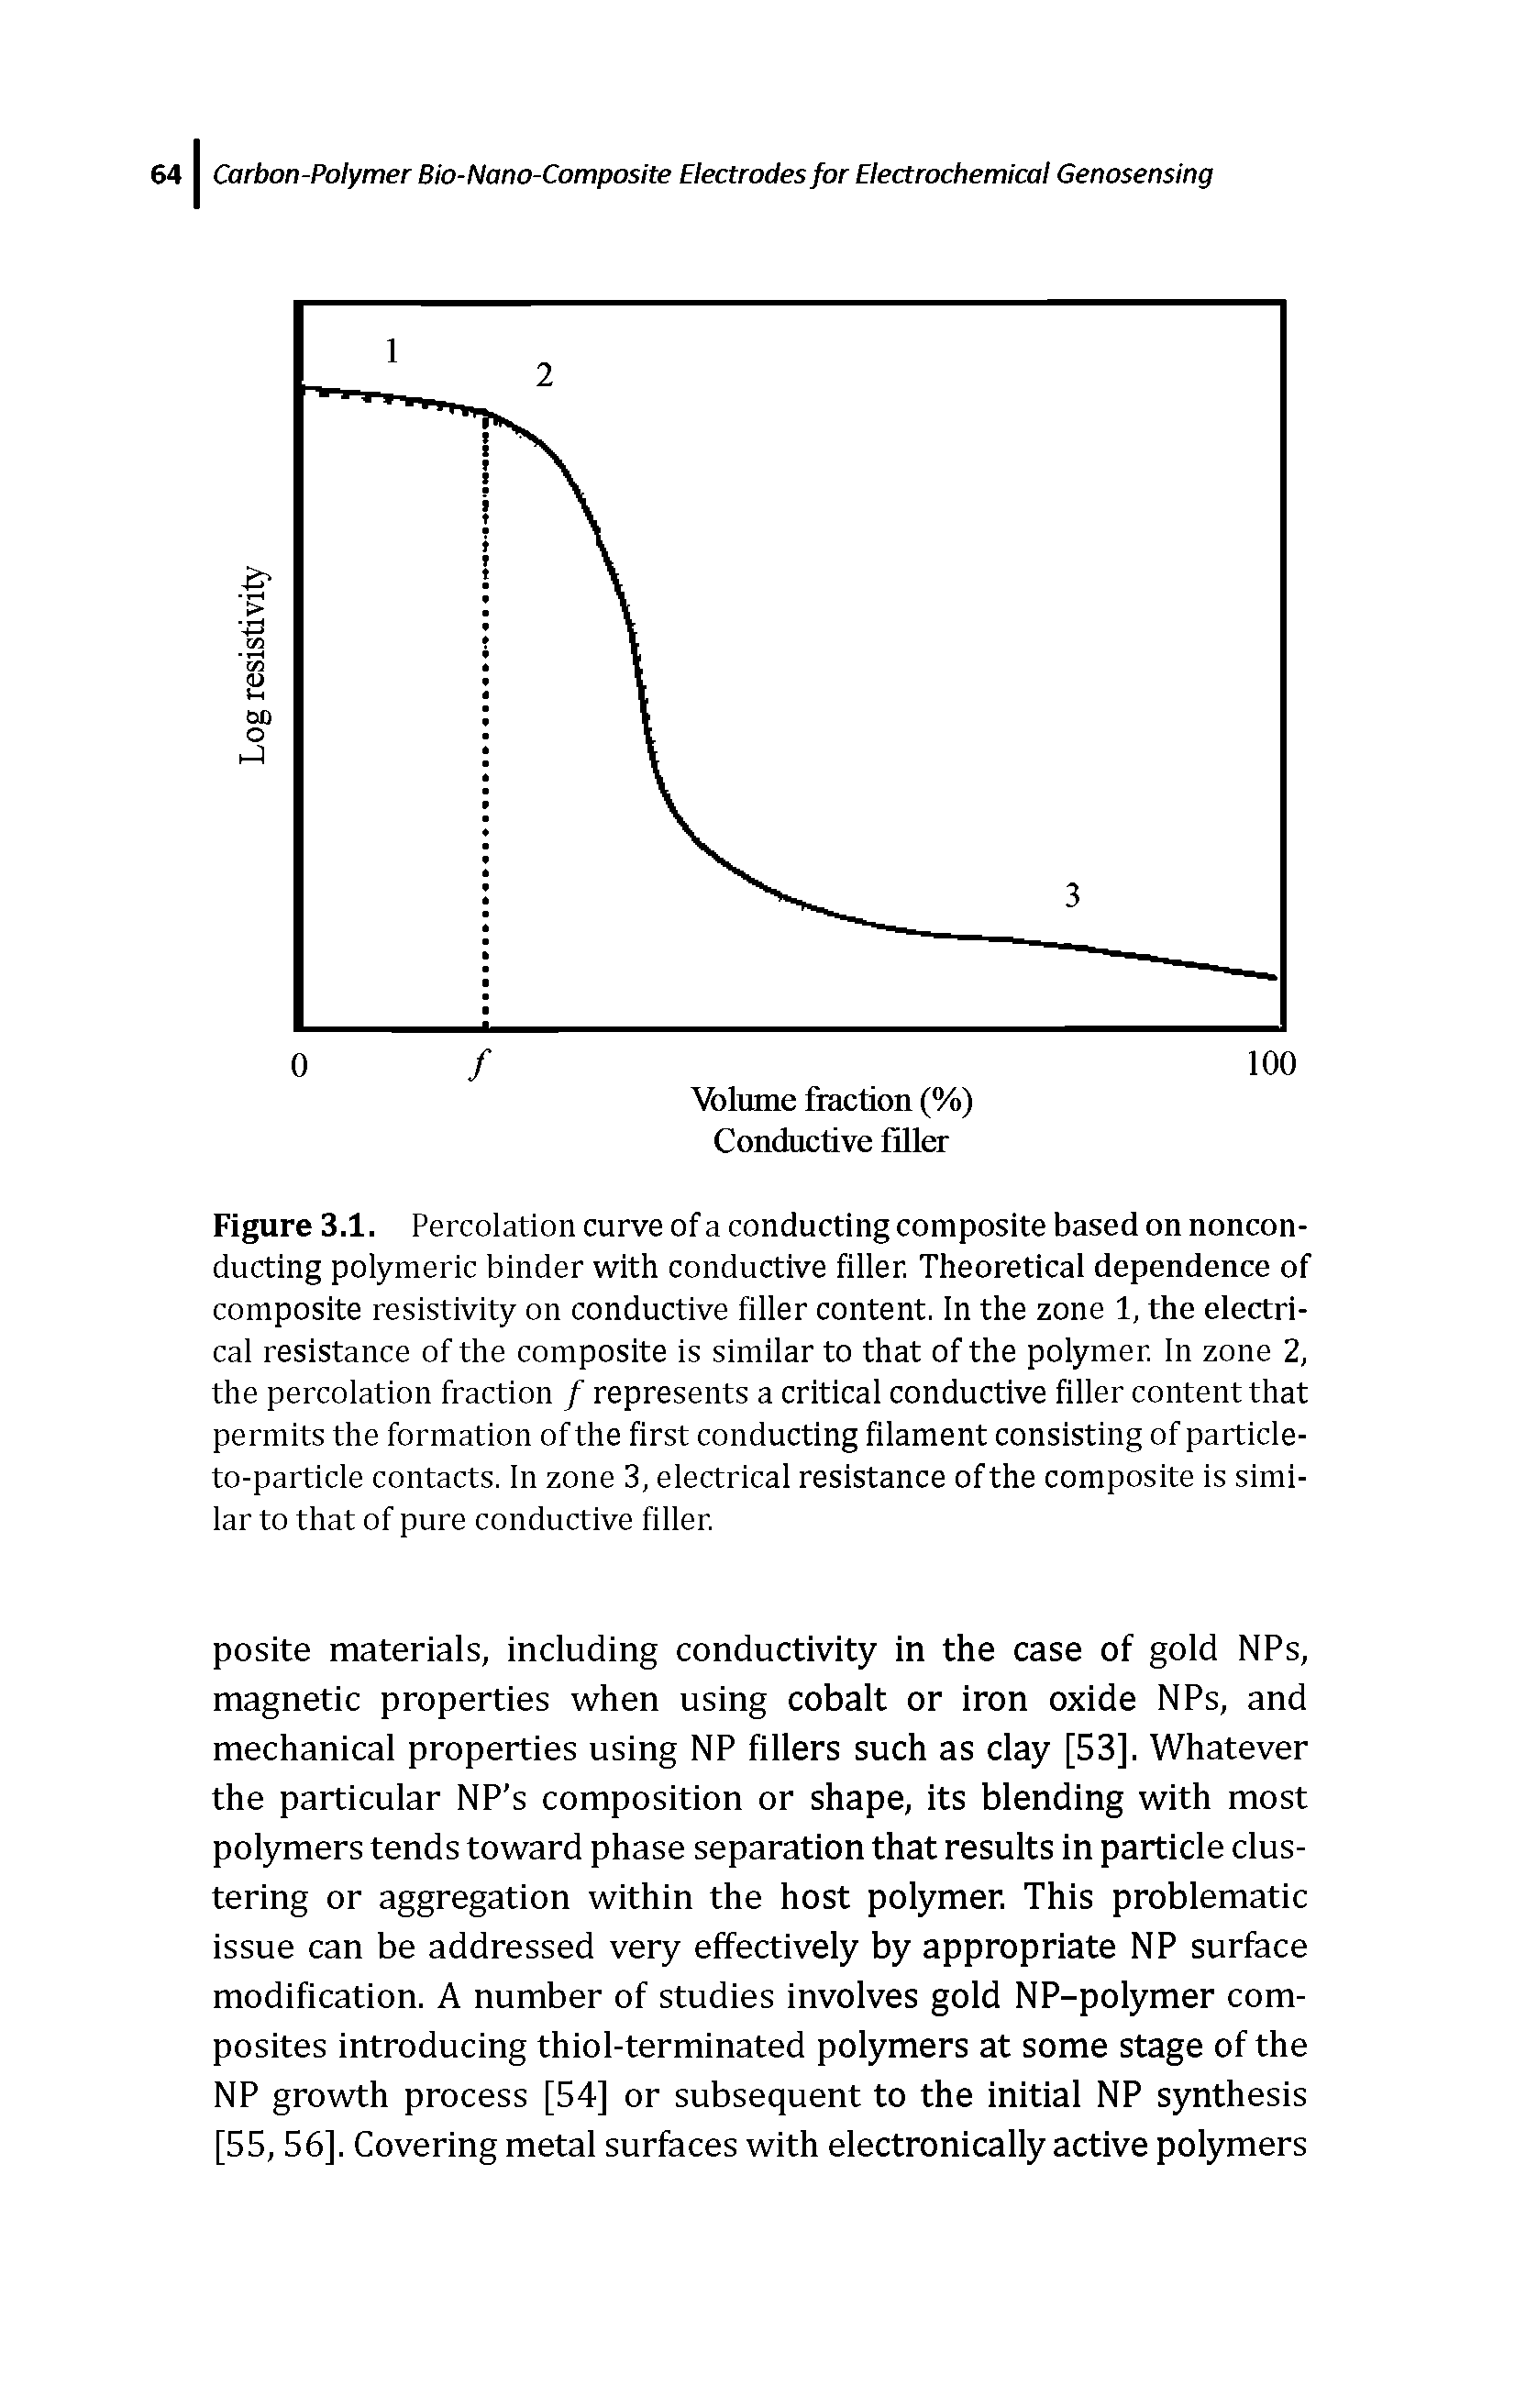 Figure 3.1. Percolation curve of a conducting composite based on nonconducting polymeric binder with conductive filler. Theoretical dependence of composite resistivity on conductive filler content. In the zone 1, the electrical resistance of the composite is similar to that of the polymer. In zone 2, the percolation fraction / represents a critical conductive filler content that permits the formation of the first conducting filament consisting of particle-to-particle contacts. In zone 3, electrical resistance of the composite is similar to that of pure conductive filler.